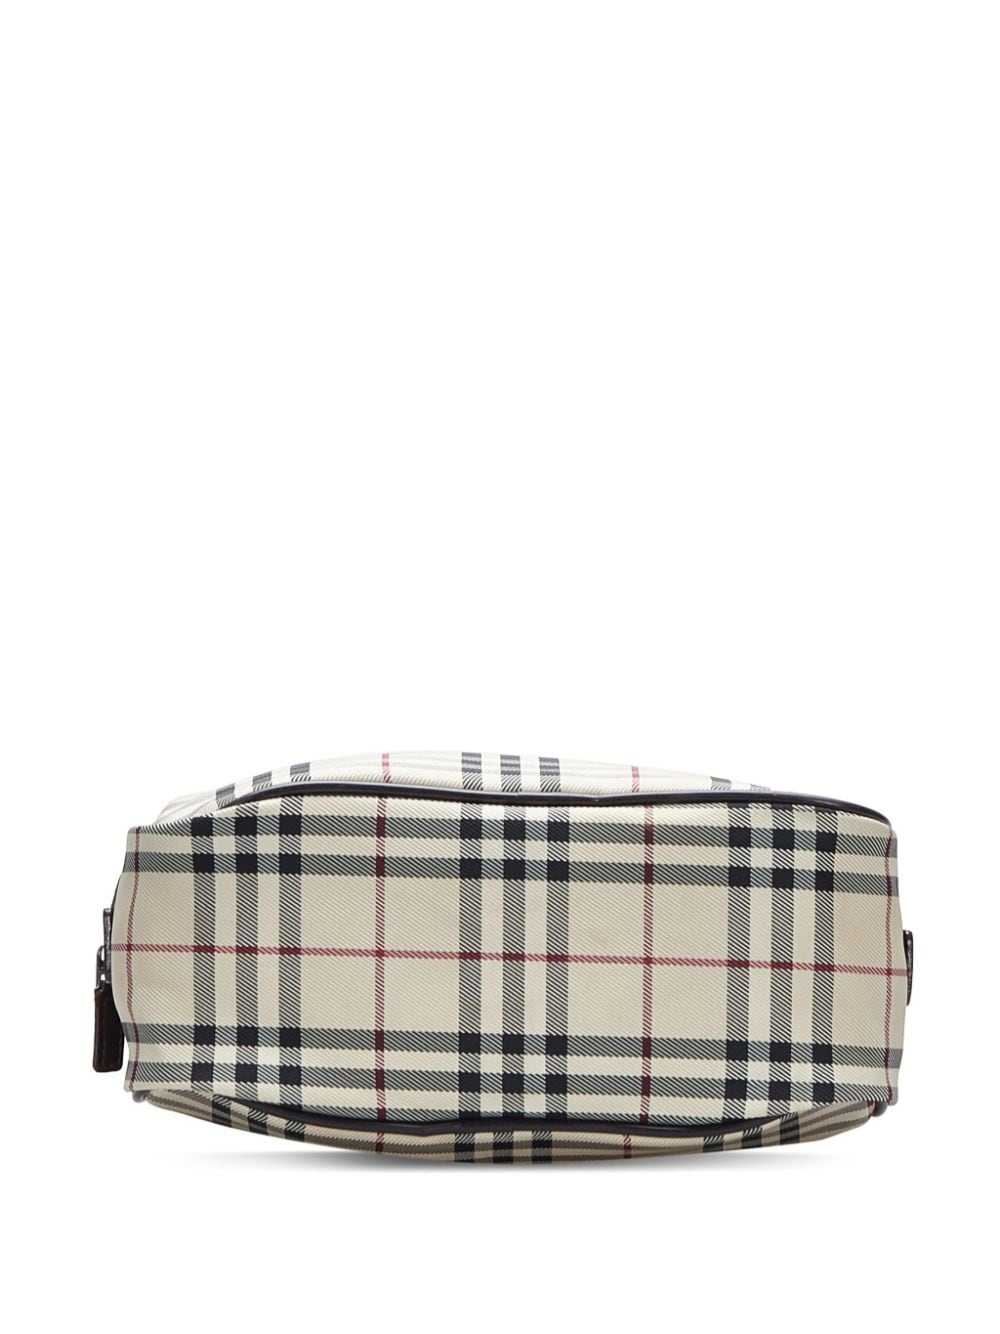 Burberry Pre-Owned Vintage Check tote bag - Brown - image 4